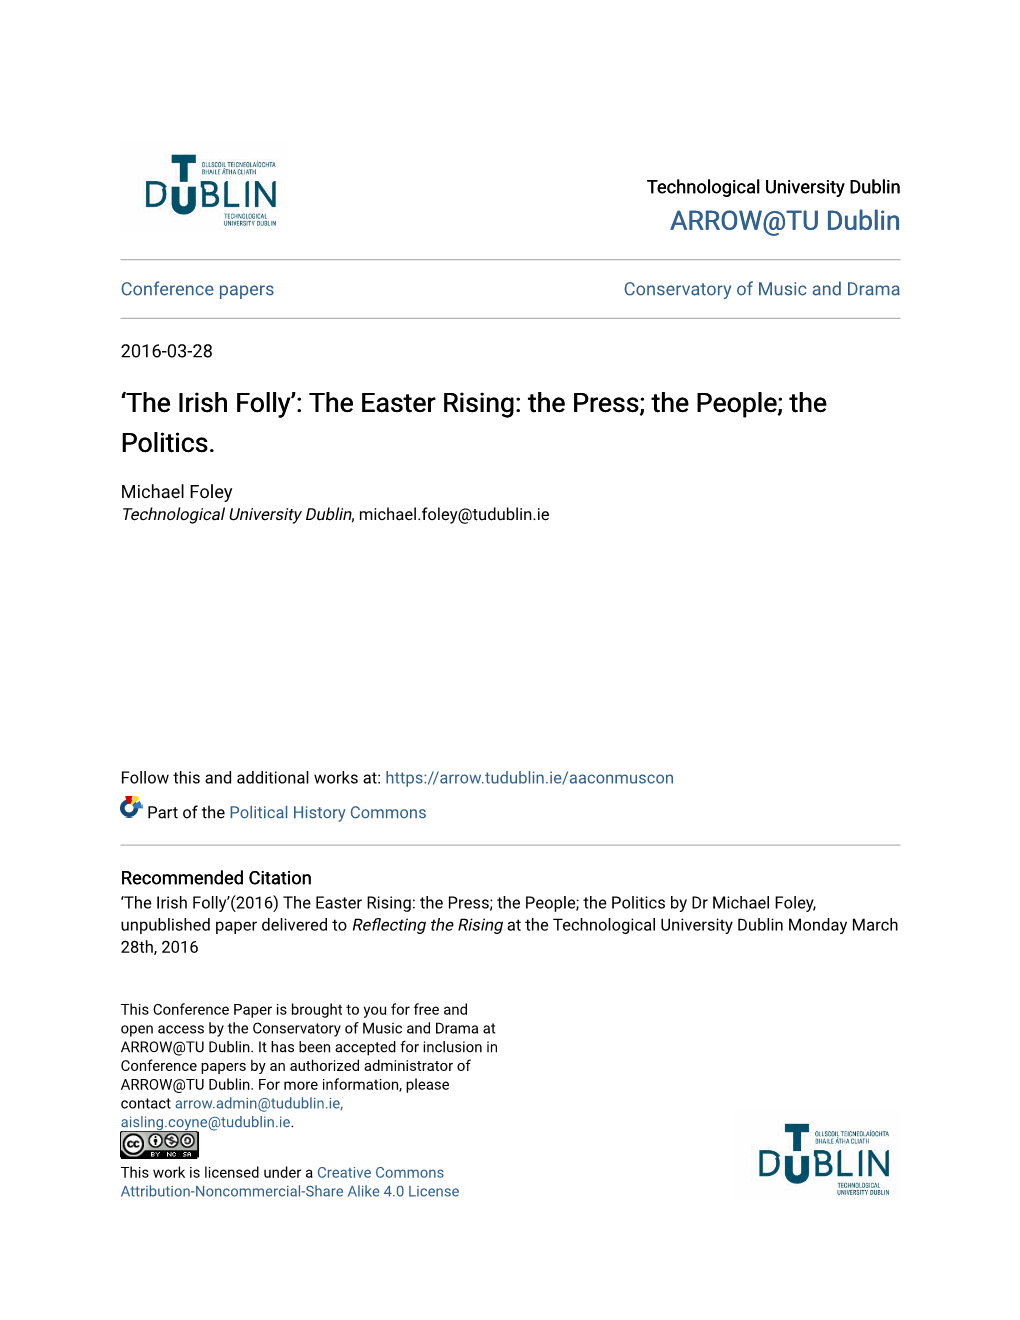 'The Irish Folly': the Easter Rising: the Press; the People; the Politics